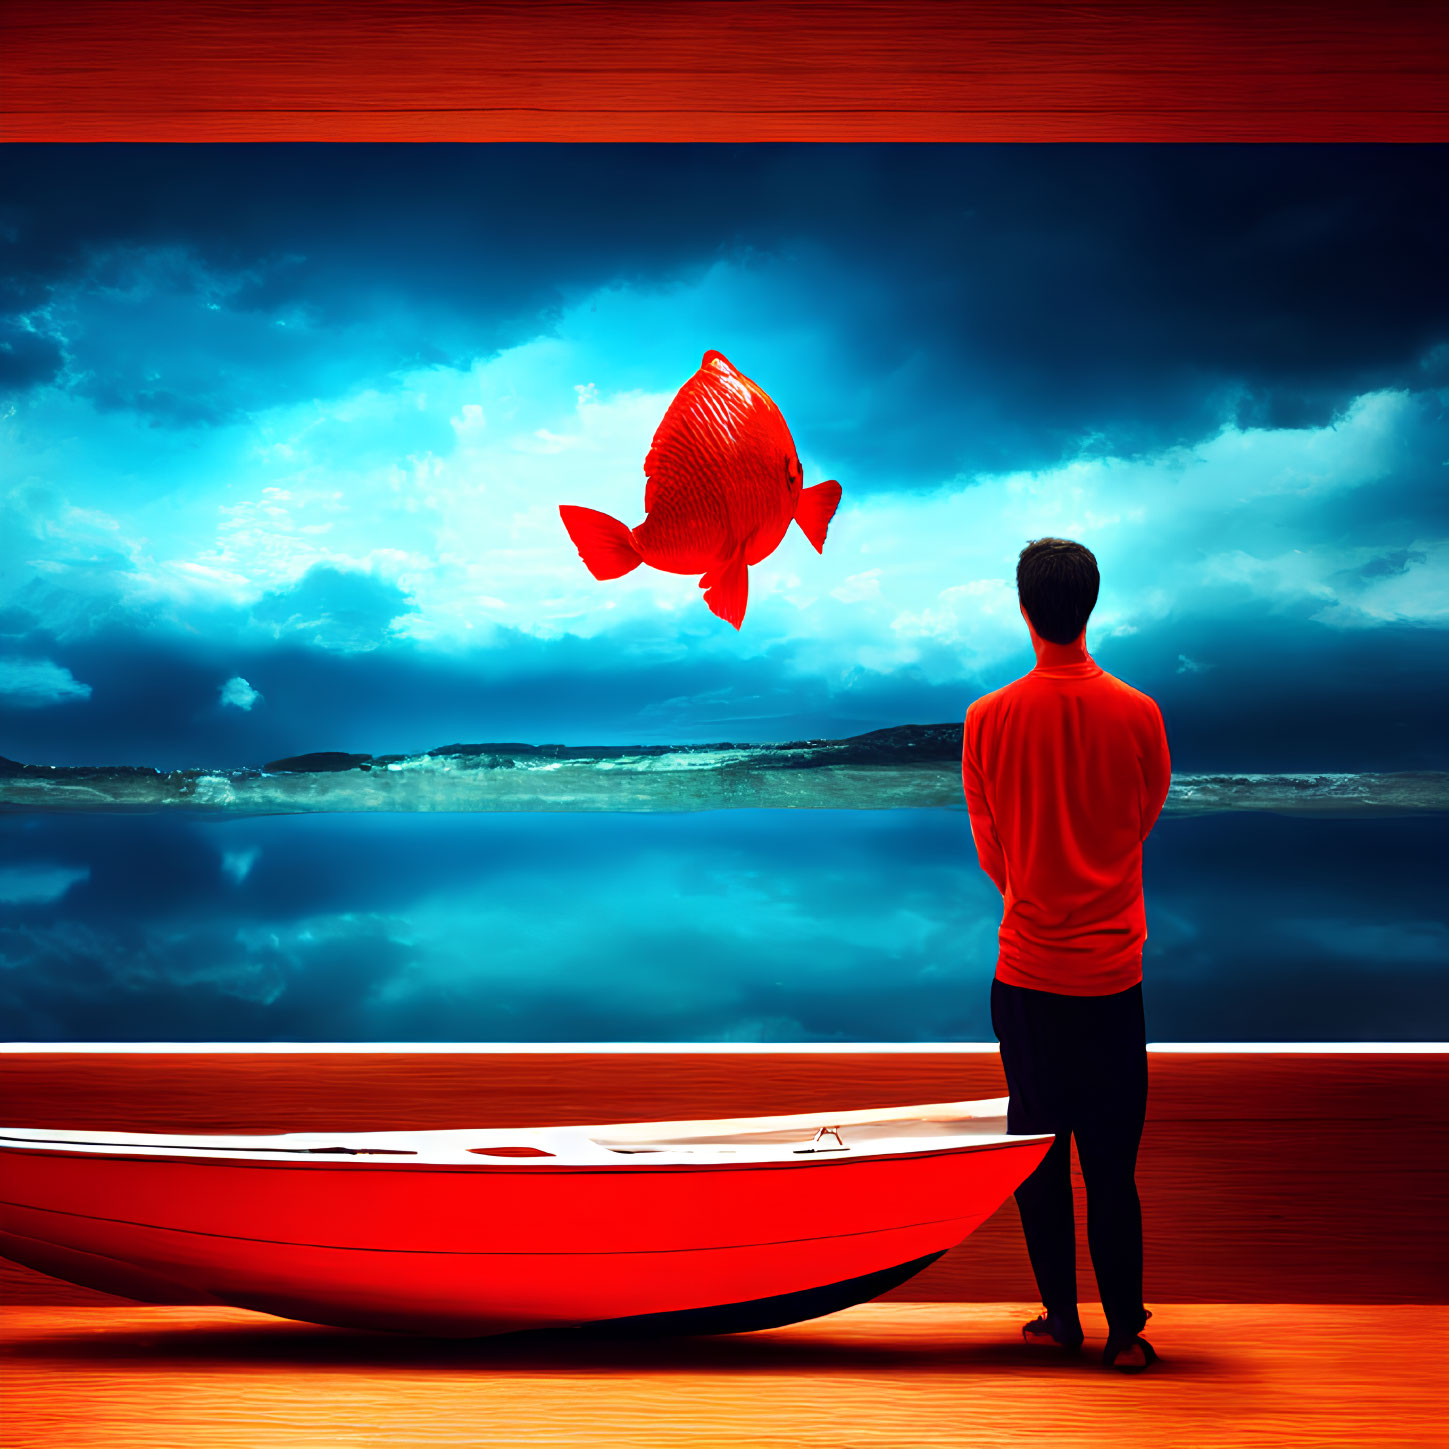 Red-shirted person with giant red fish above surreal scene